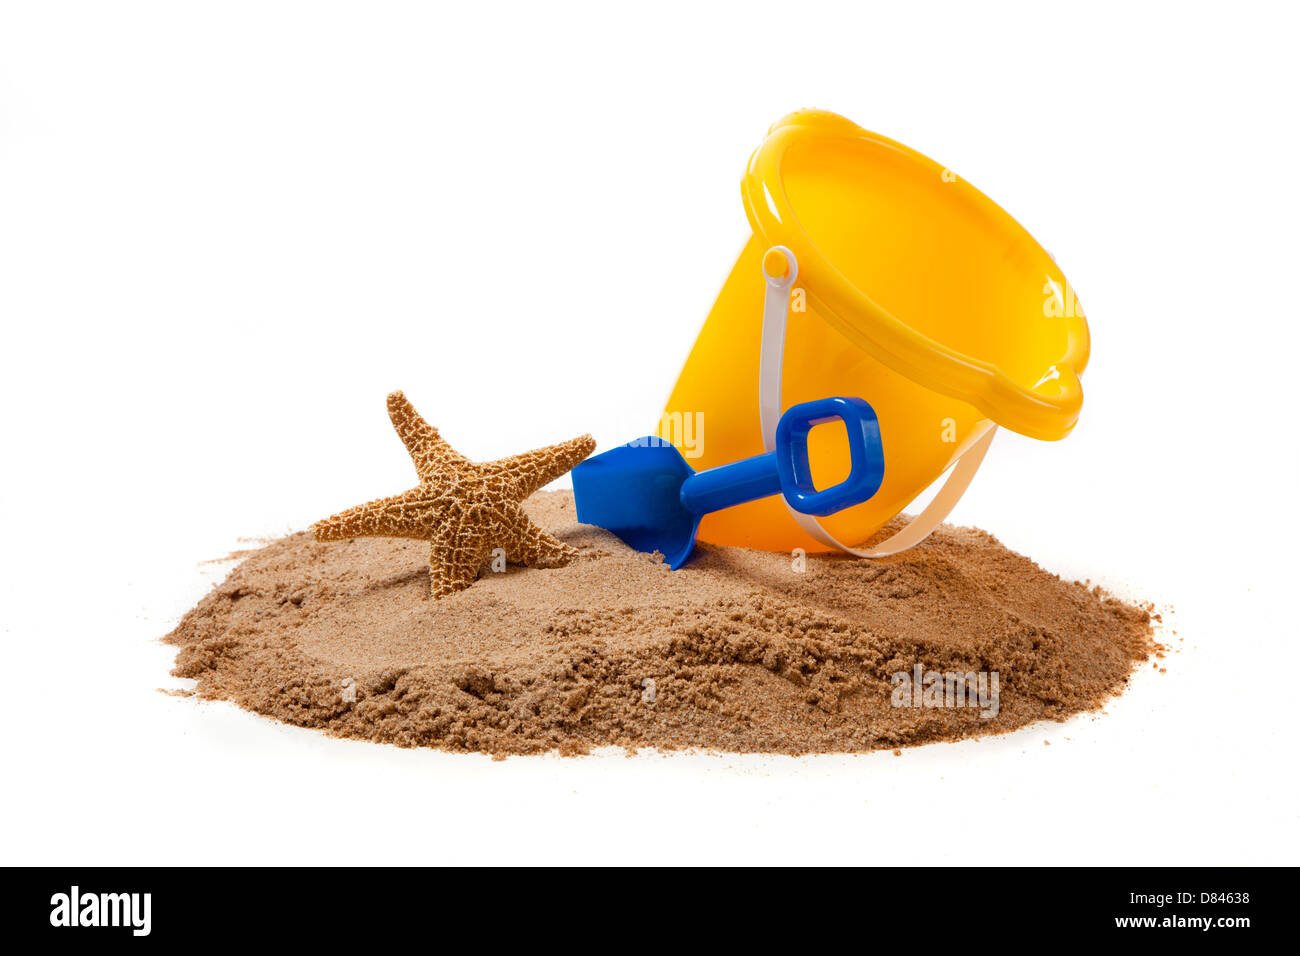 A yellow pail, blue shovel and a starfish on sand on a white background with copy space Stock Photo